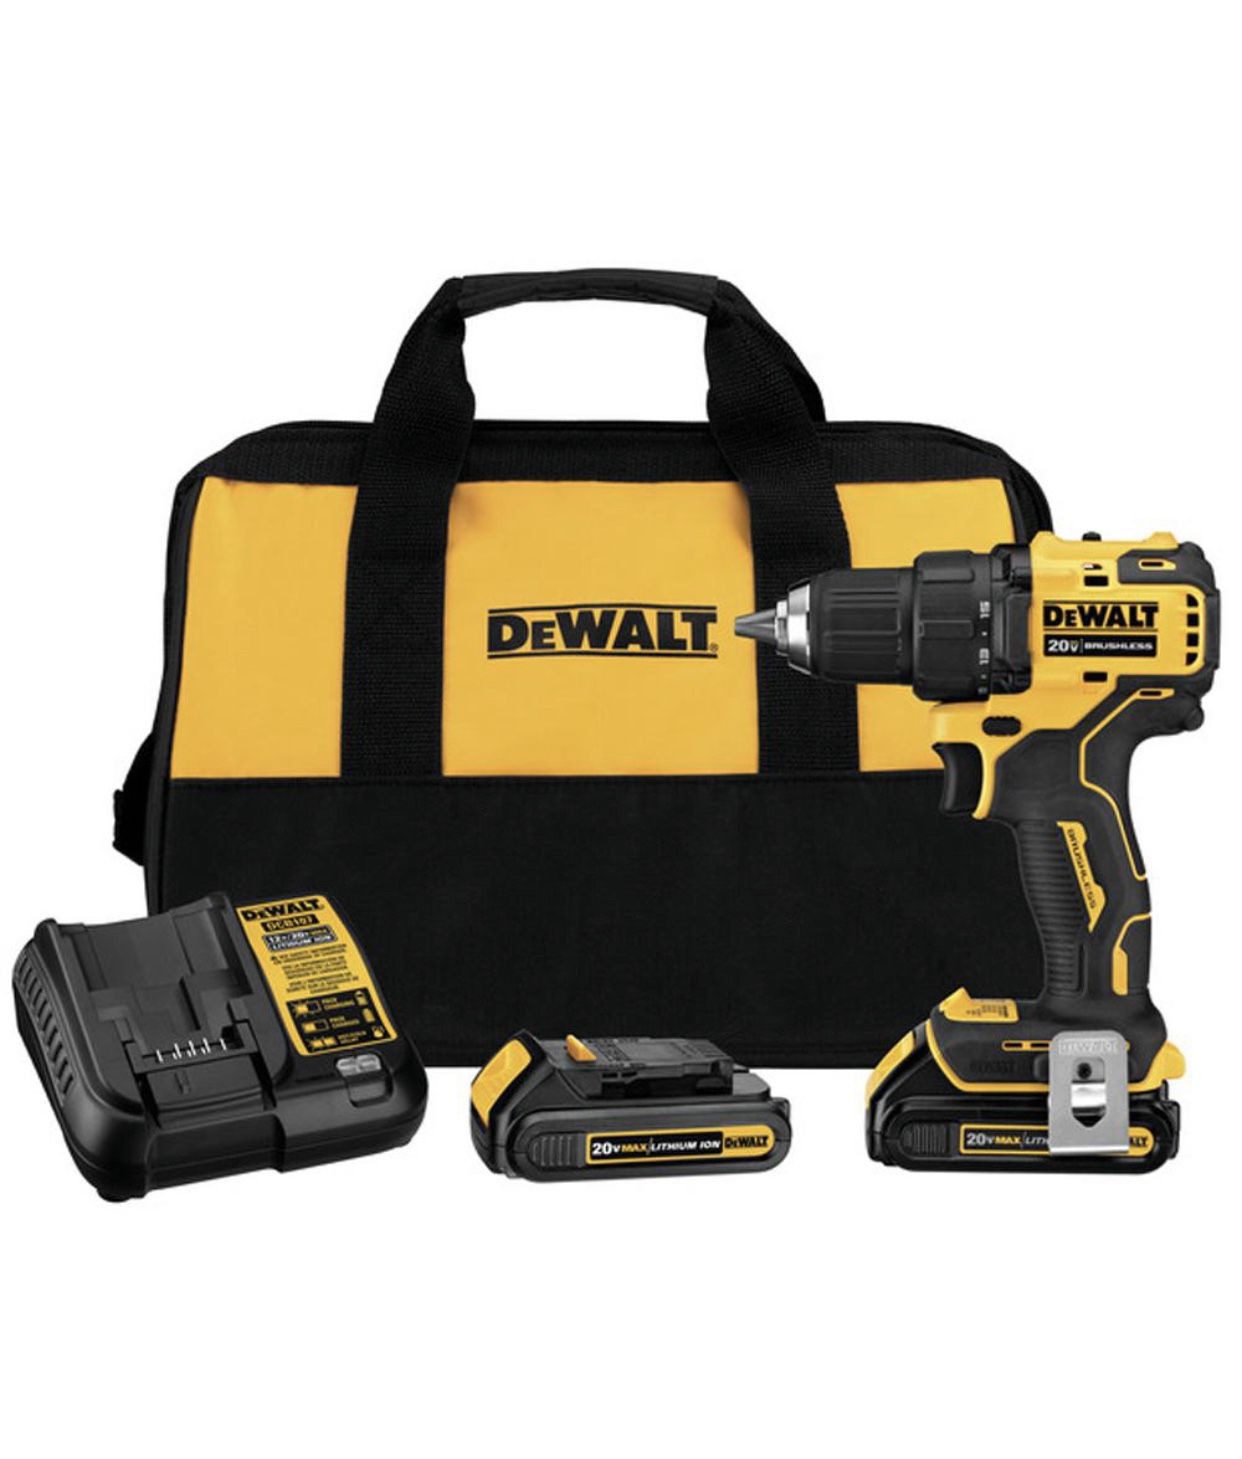 DEWALT ATOMIC 20-Volt MAX Lithium-Ion Brushless Cordless Compact 1/2 in. Drill Driver w/ 1 Batteries 1.3Ah, Charger & Bag